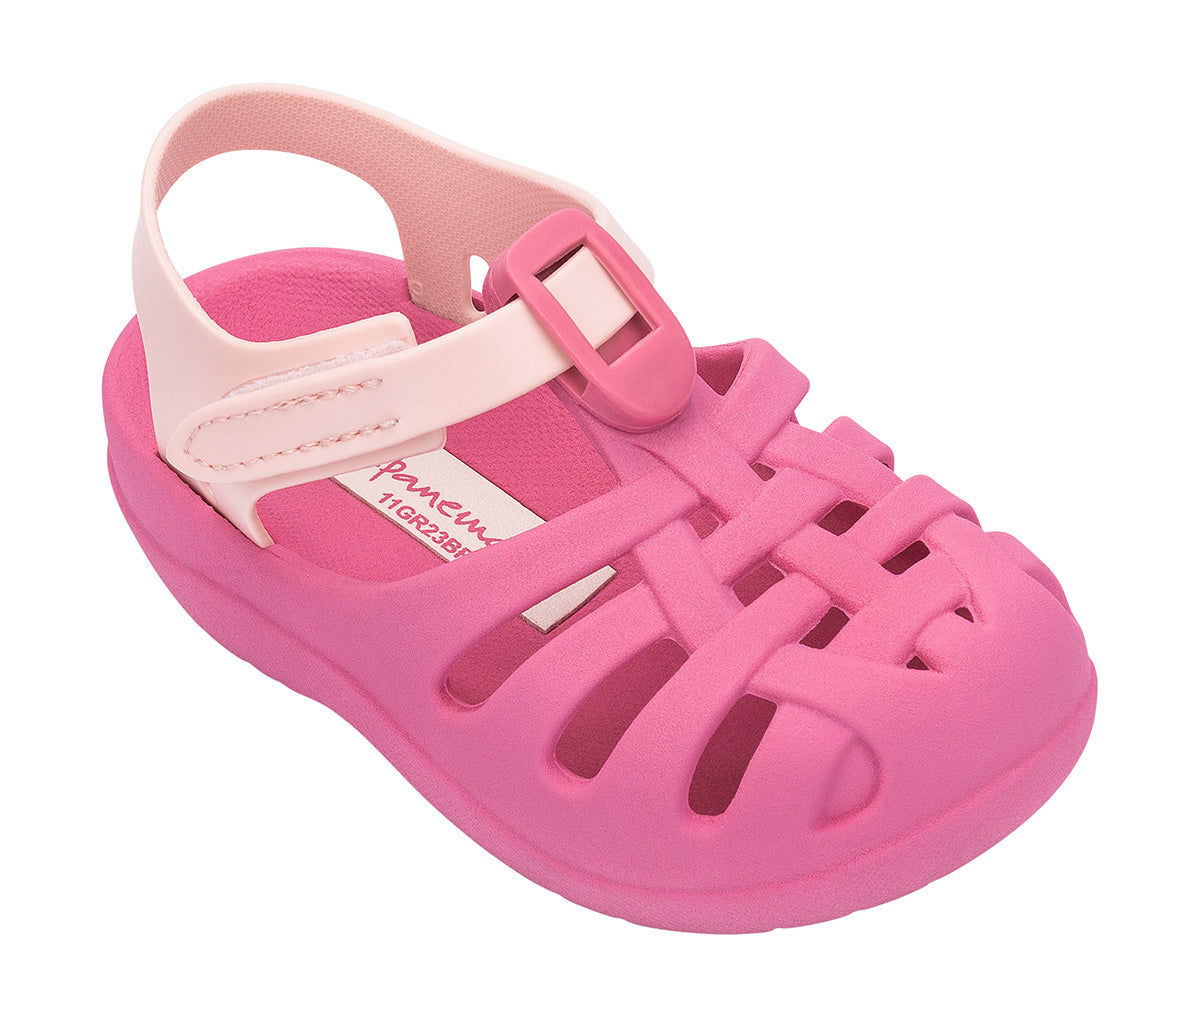 Angled view of a pink Ipanema Summer Basic baby sandal.